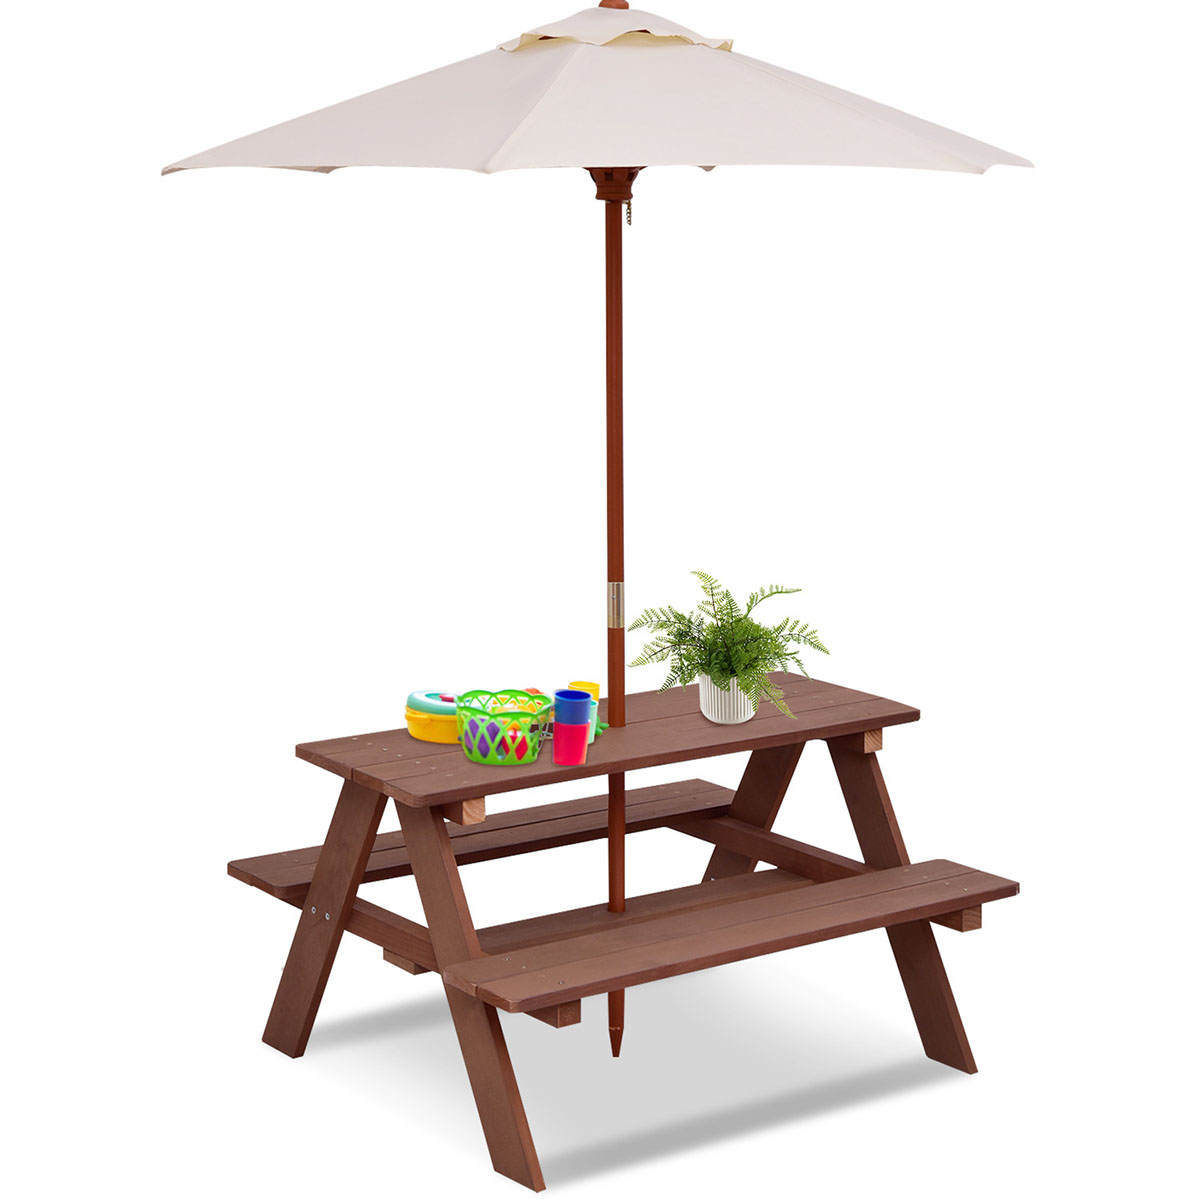 15 Amazing Kids Picnic Table With Umbrella For 2023 1703770421 